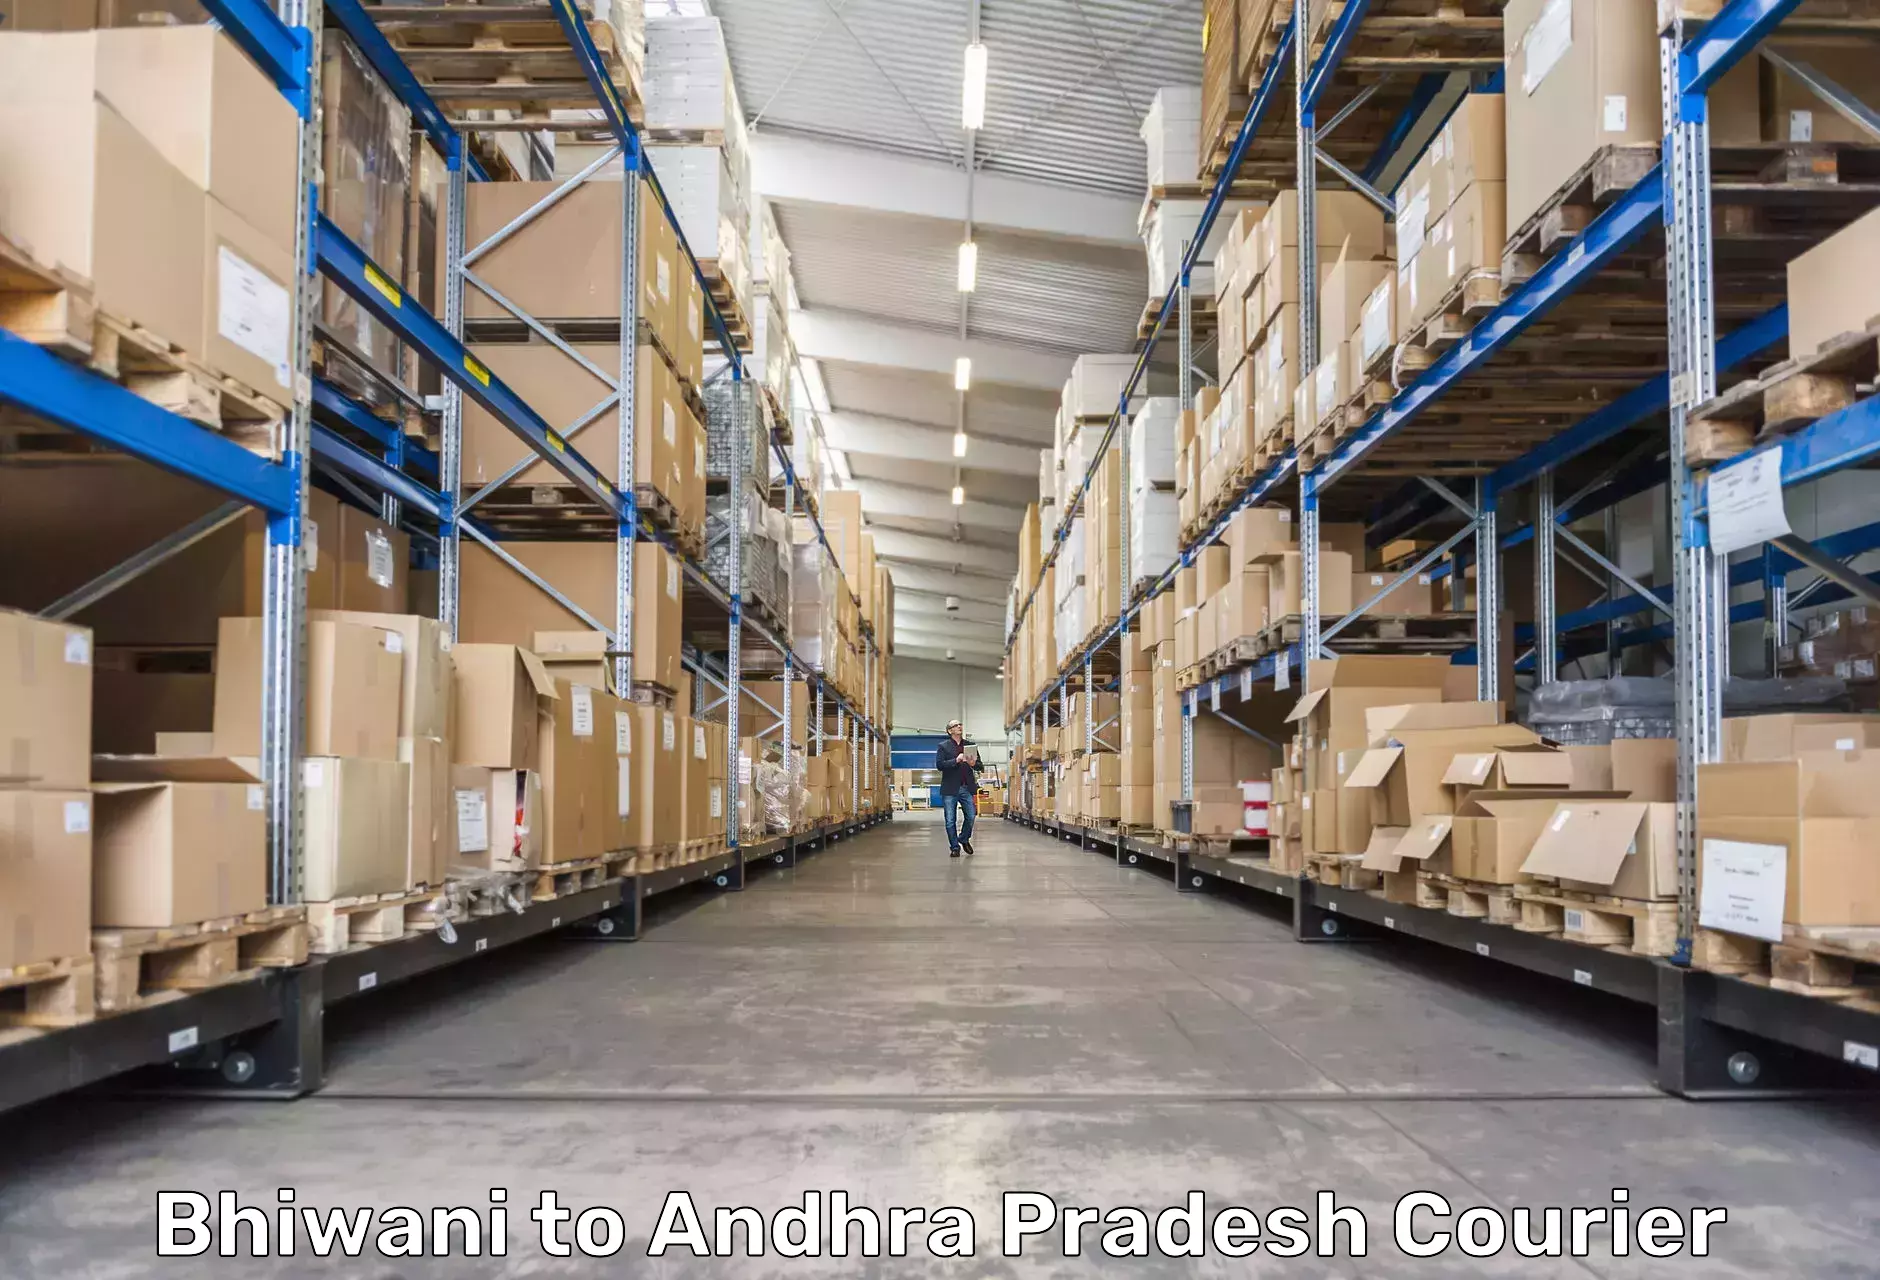 Parcel service for businesses in Bhiwani to Visakhapatnam Port